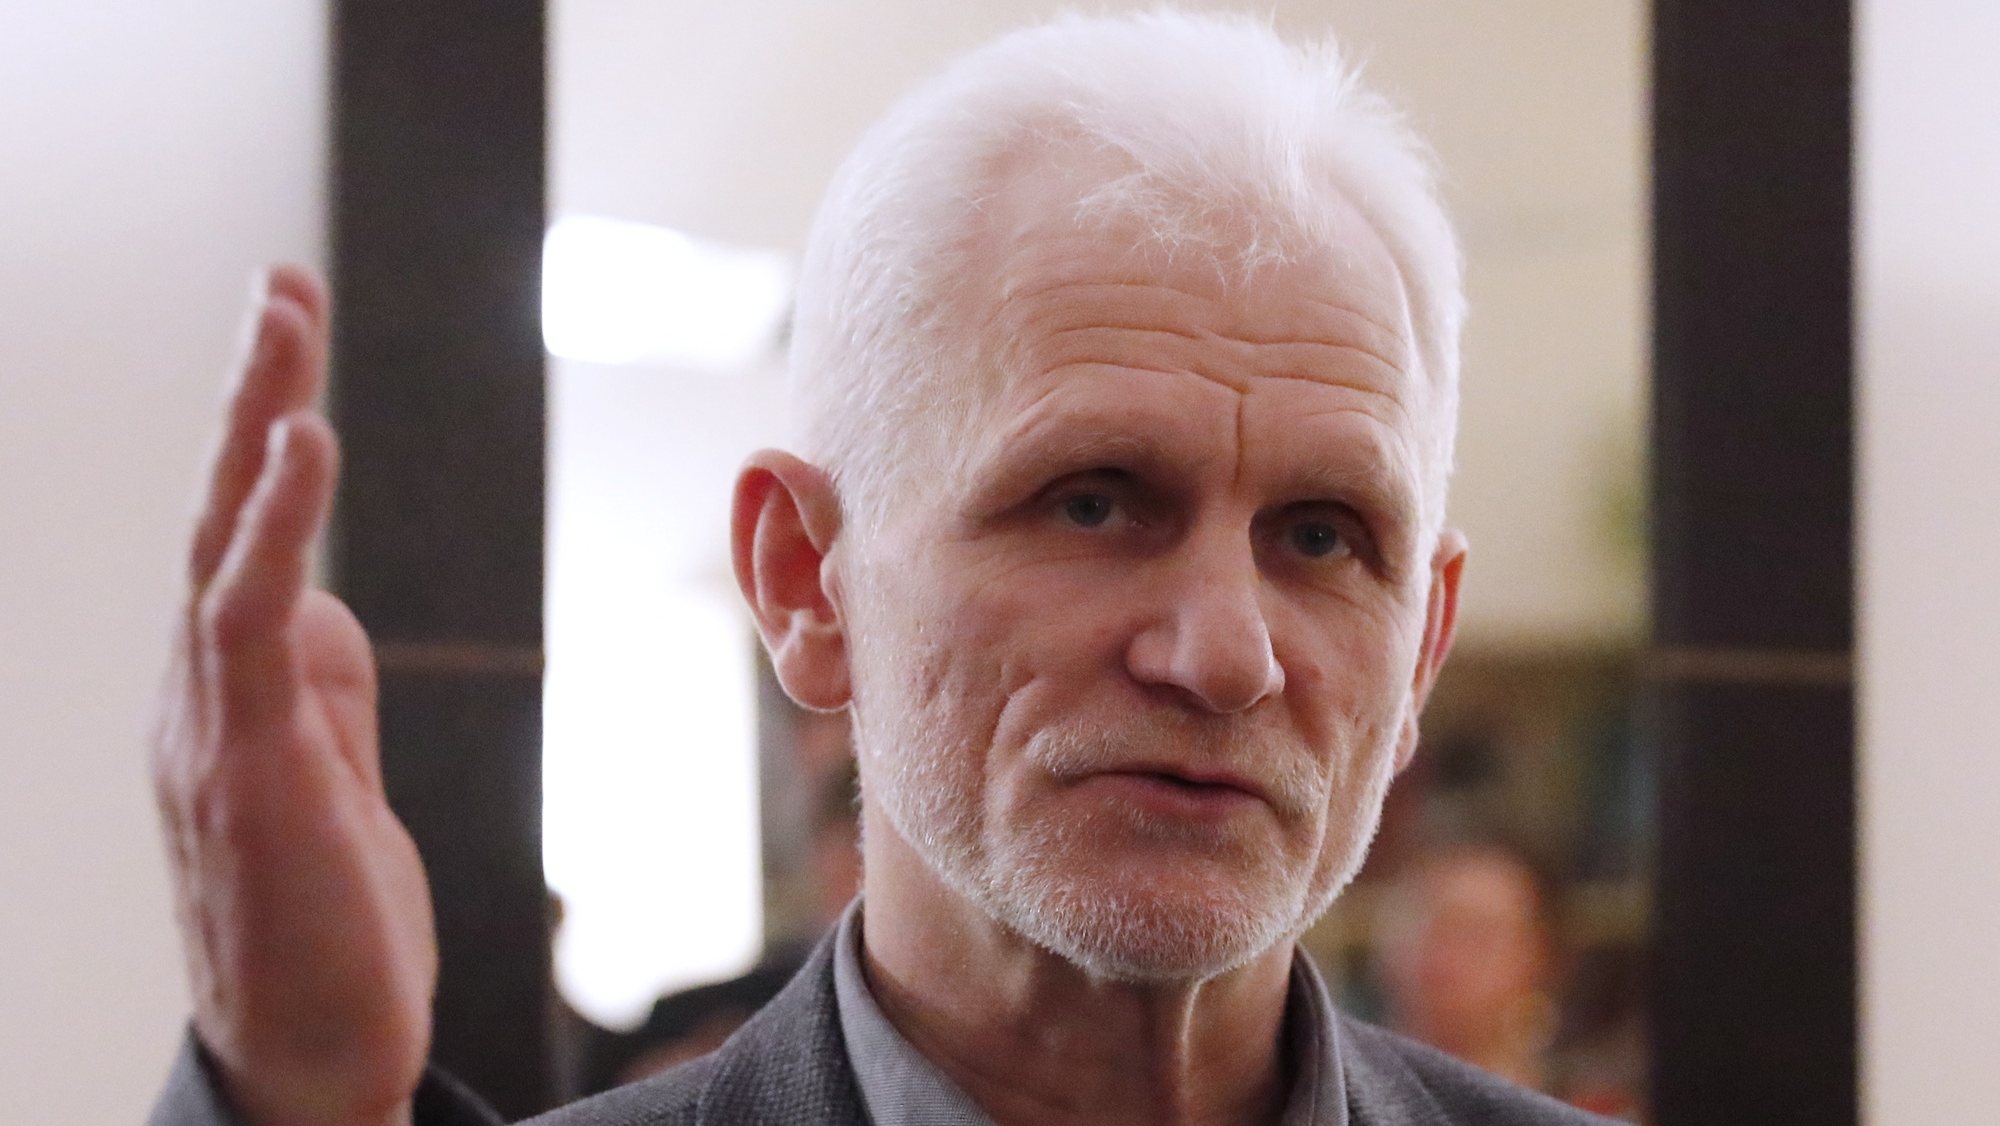 epa10228788 (FILE) - Belarusian human rights activist Ales Bialiatski (also transliterated as Alex Belyatsky) talks to the media as he receives the Franco-German Prize for Human Rights and the Rule of Law during a ceremony in Minsk, Belarus, 11 December 2019 (reissued 07 October 2022). The Nobel Peace Prize 2022 has been awarded to human rights advocate Ales Bialiatski from Belarus, the Russian human rights organization Memorial and the Ukrainian human rights organization Center for Civil Liberties. The Norwegian Nobel Committee said in a statement on 07 October 2022, that by awarding the Nobel Peace Prize for 2022 to Bialiatski, Memorial and the Center for Civil Liberties, it wishes to &#039;honour three outstanding champions of human rights, democracy and peaceful co-existence in the neighbour countries Belarus, Russia and Ukraine.&#039; Bialiatski was imprisoned from 2011 to 2014 and following large-scale demonstrations against the Belarus regime in 2020, he was again arrested and still detained without trial, the Norwegian Nobel Committee added.  EPA/TATYANA ZENKOVICH *** Local Caption *** 55701031